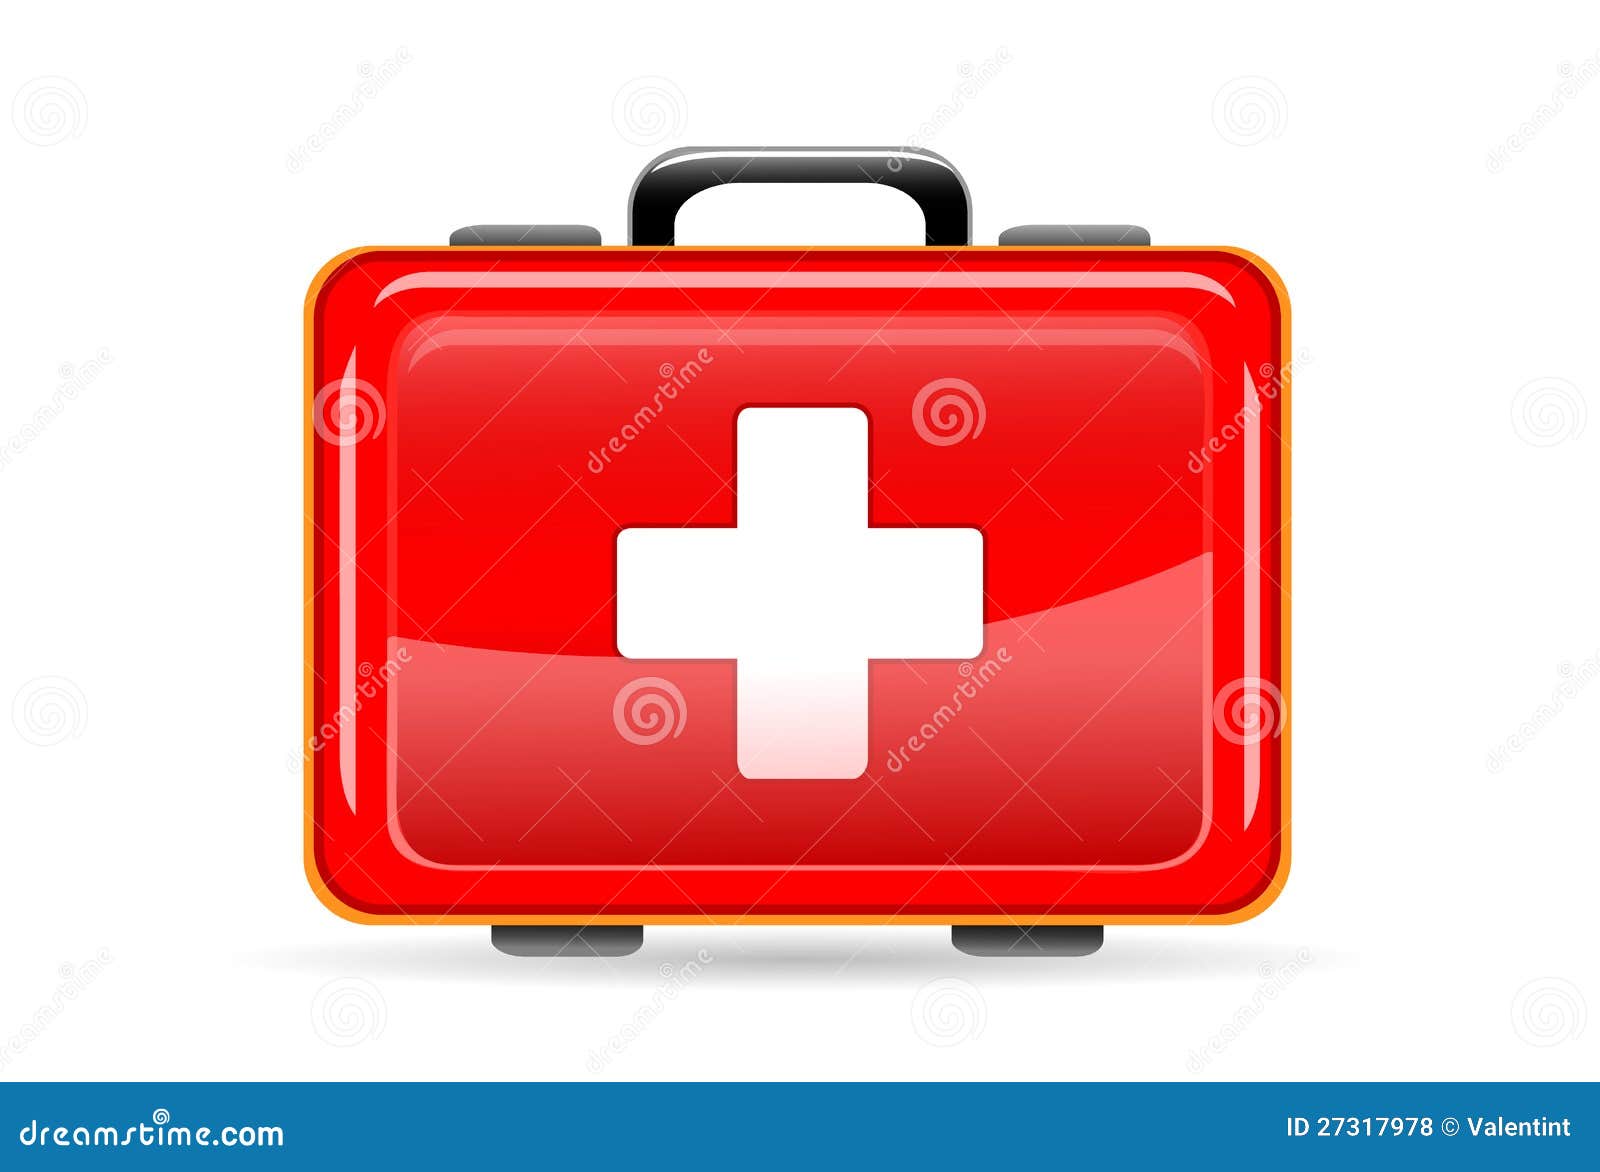 free clipart doctor bag - photo #5